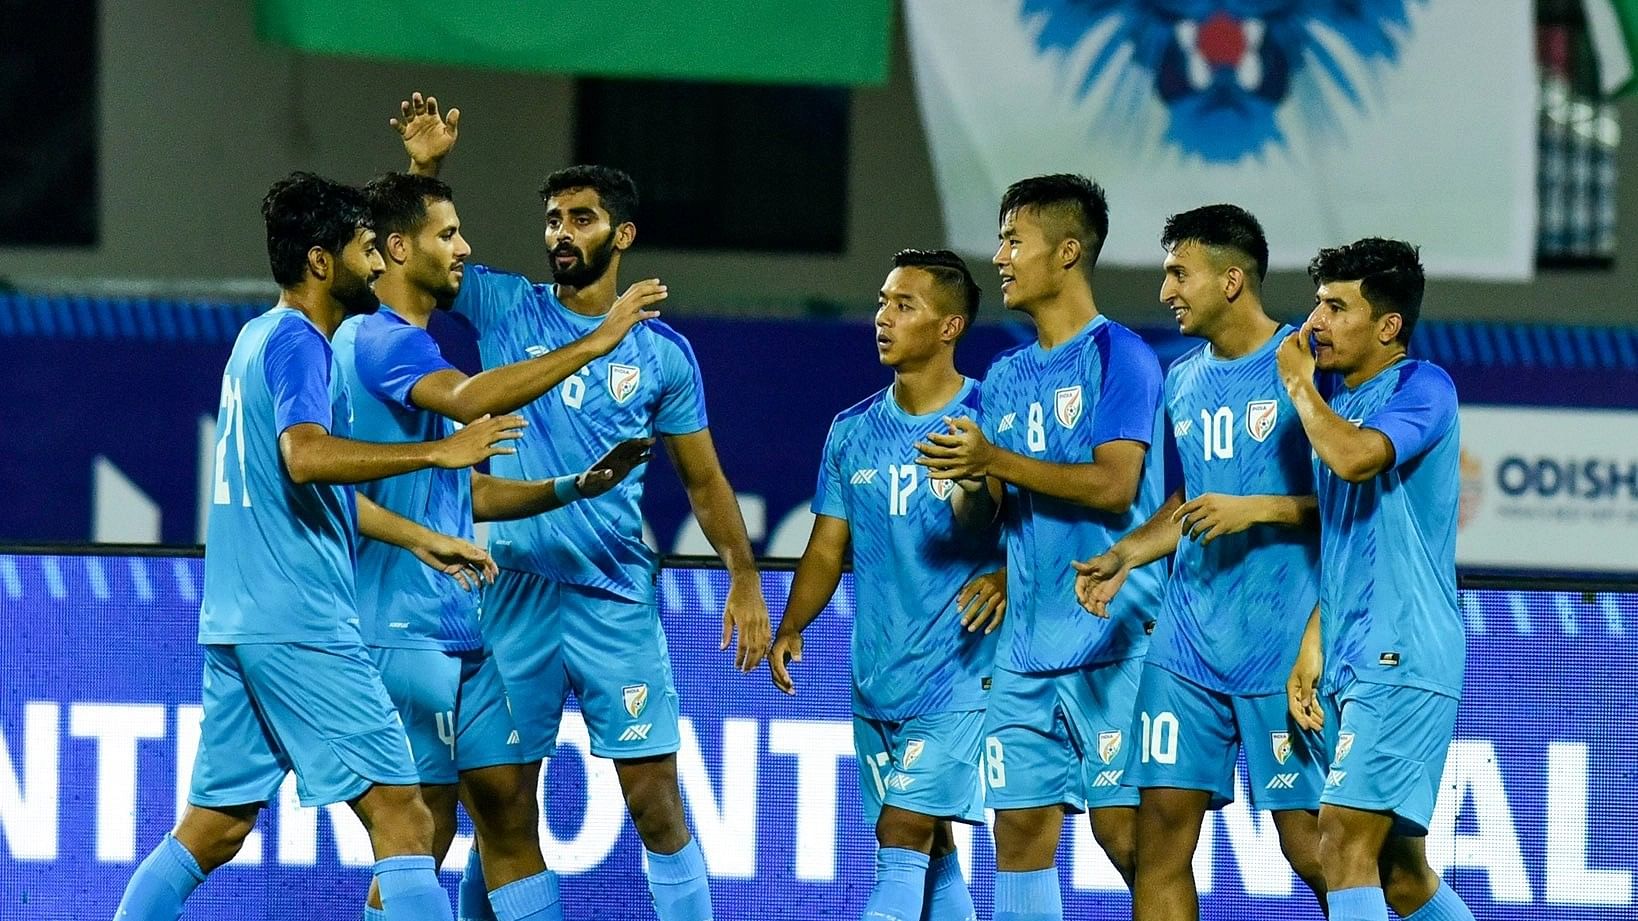 India vs Lebanon Football Match Intercontinental Cup 2023 Live Streaming and Telecast Date, Time, Venue, and Other Important Details